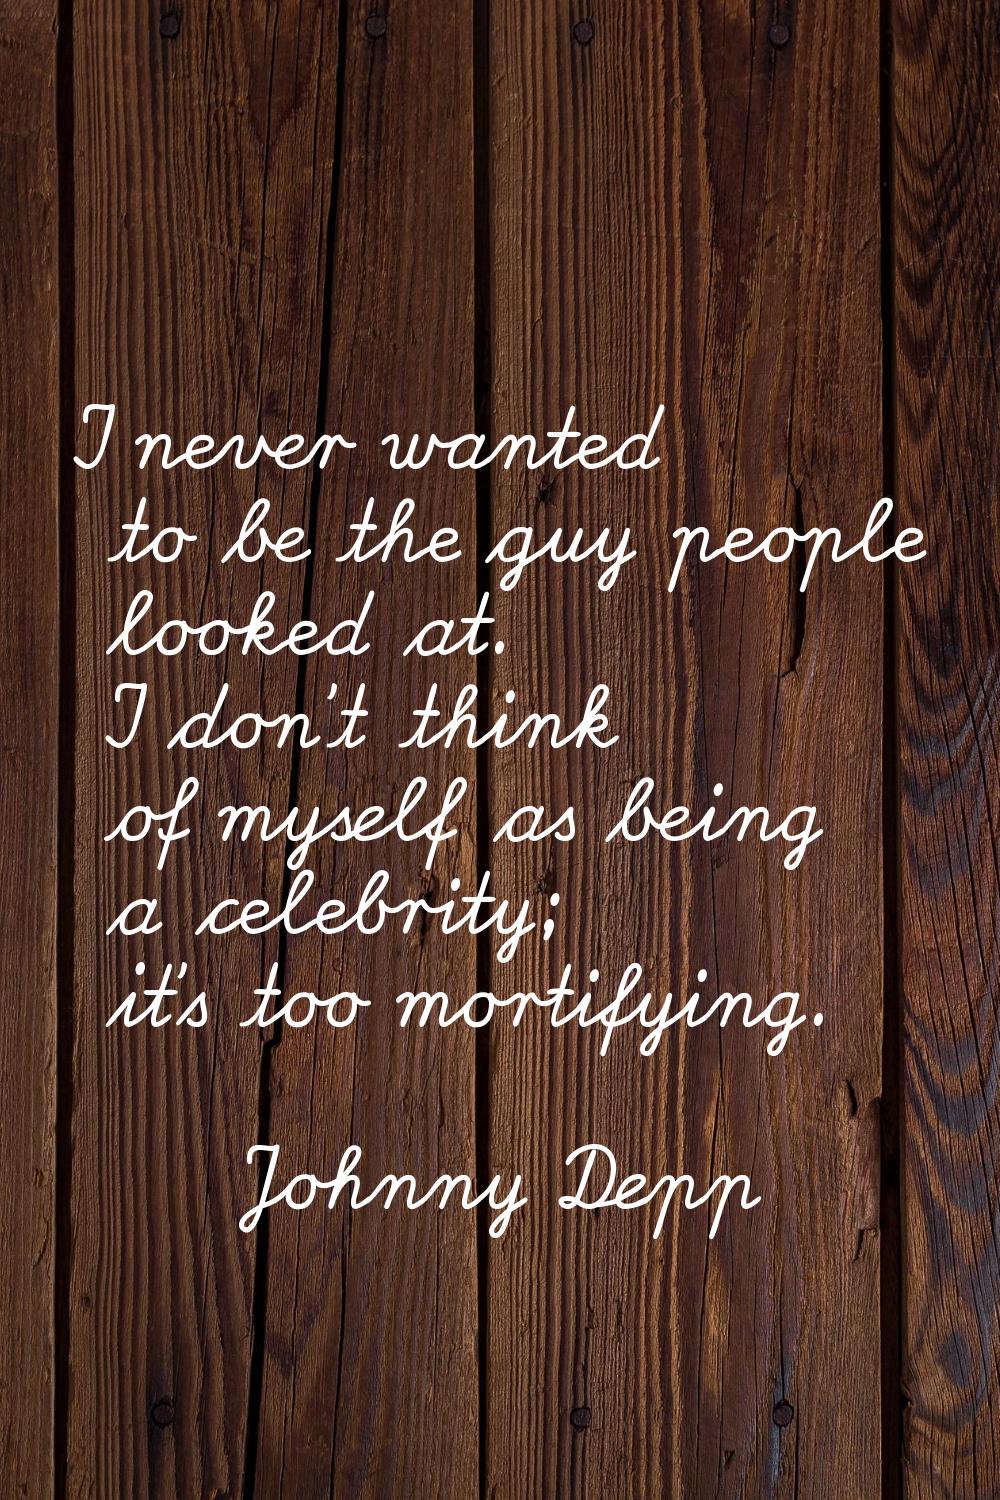 I never wanted to be the guy people looked at. I don't think of myself as being a celebrity; it's t